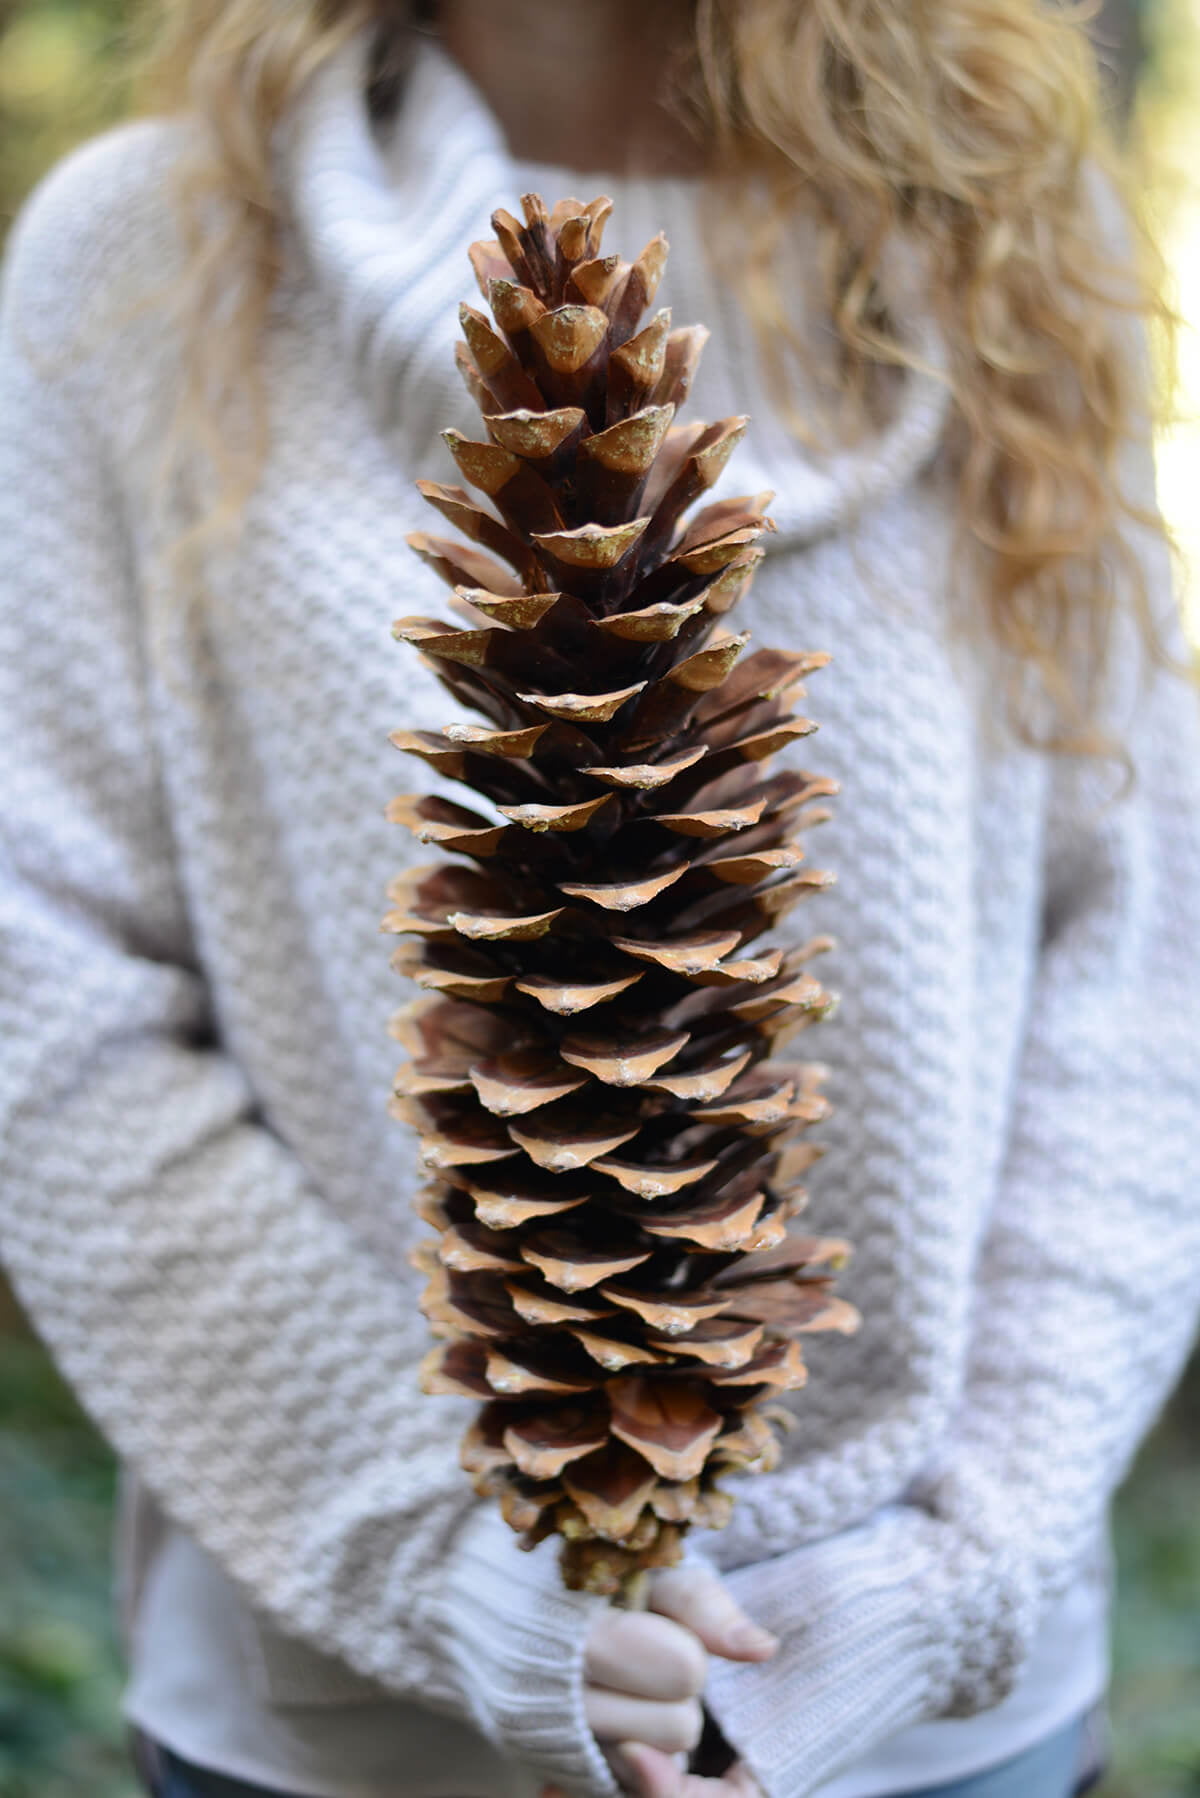 Large Sugar Pine Cone Chews For Small Pets